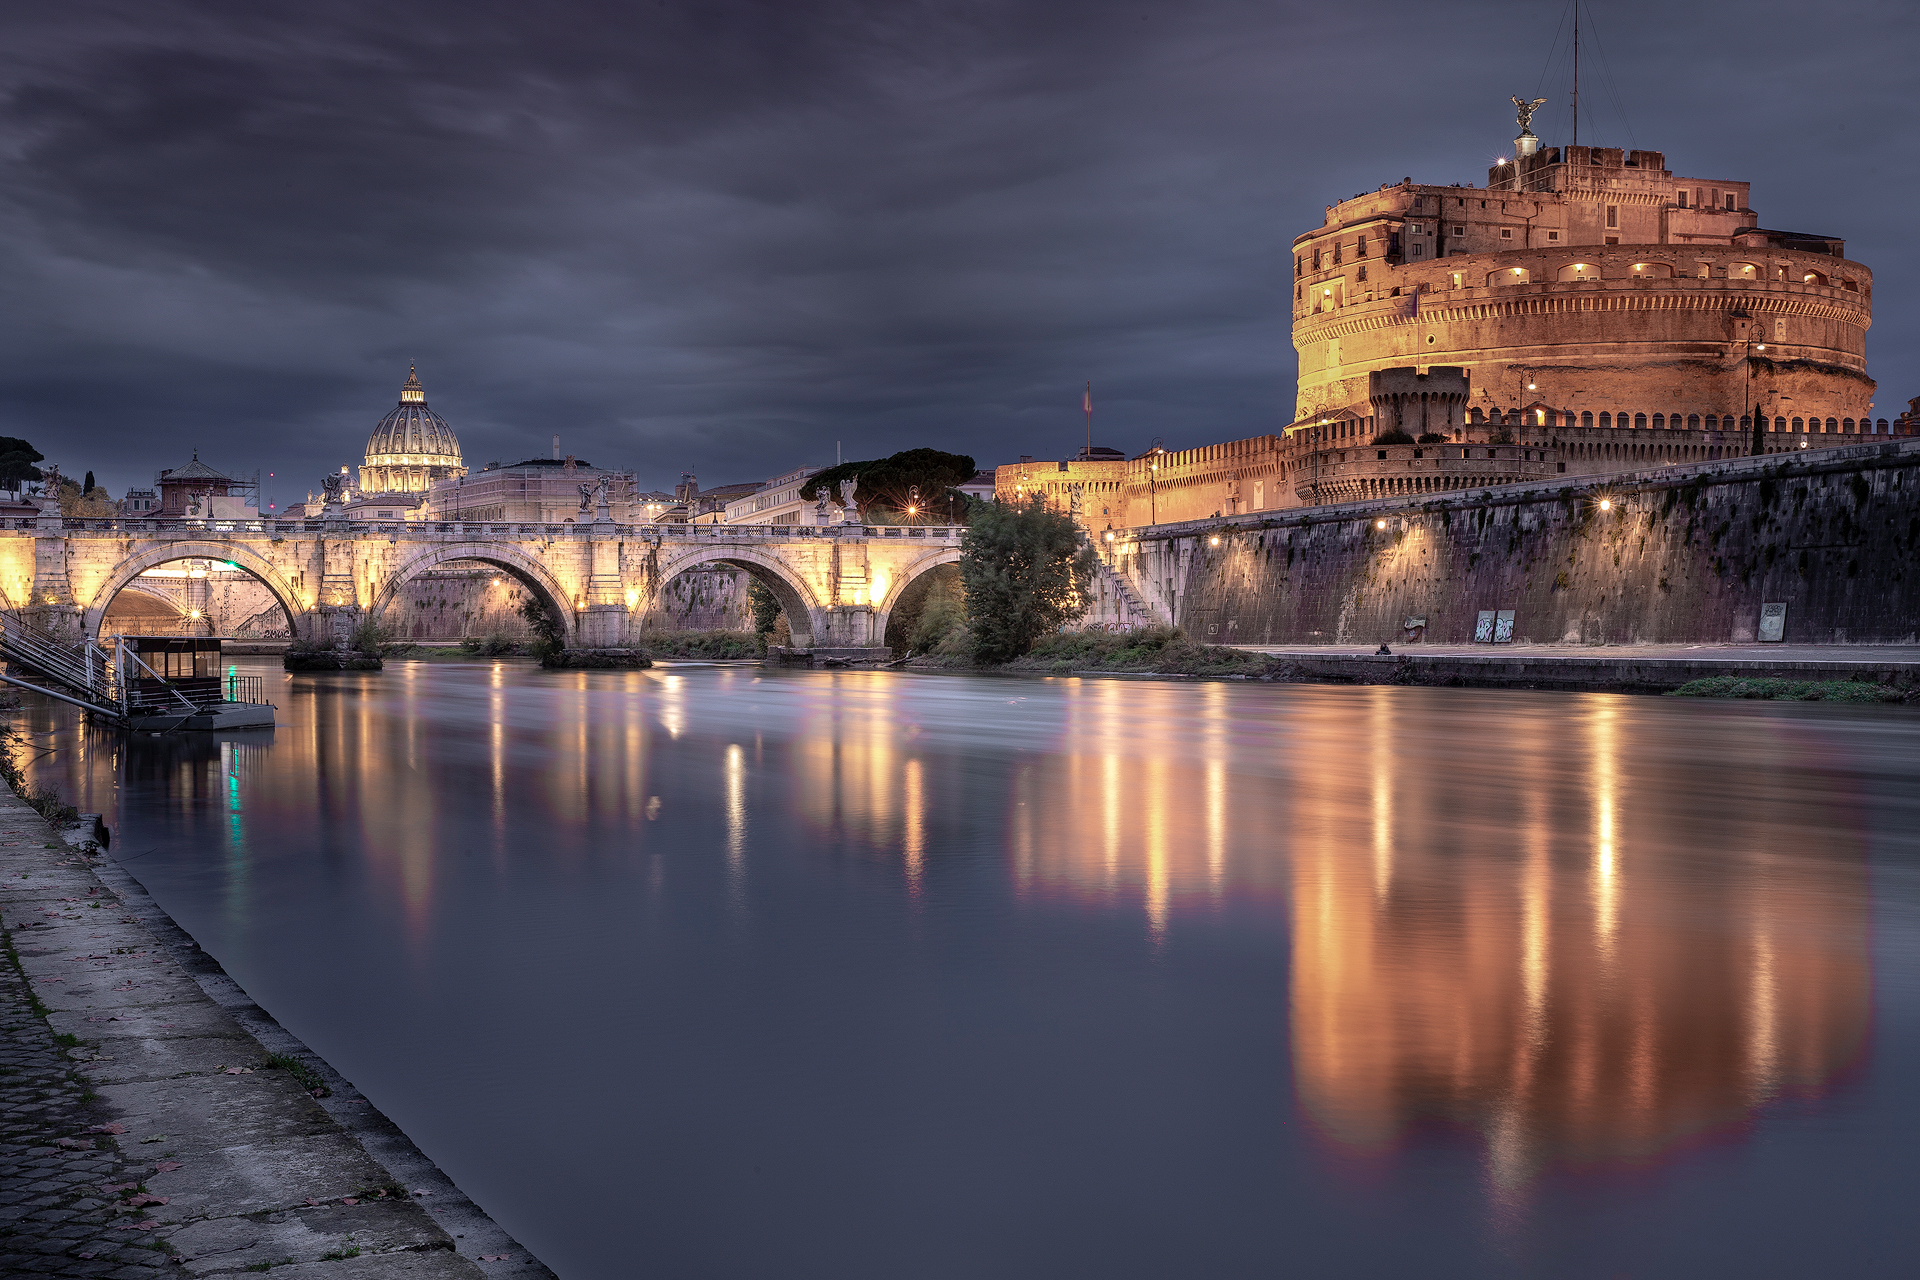 The reflection of the Tiber...